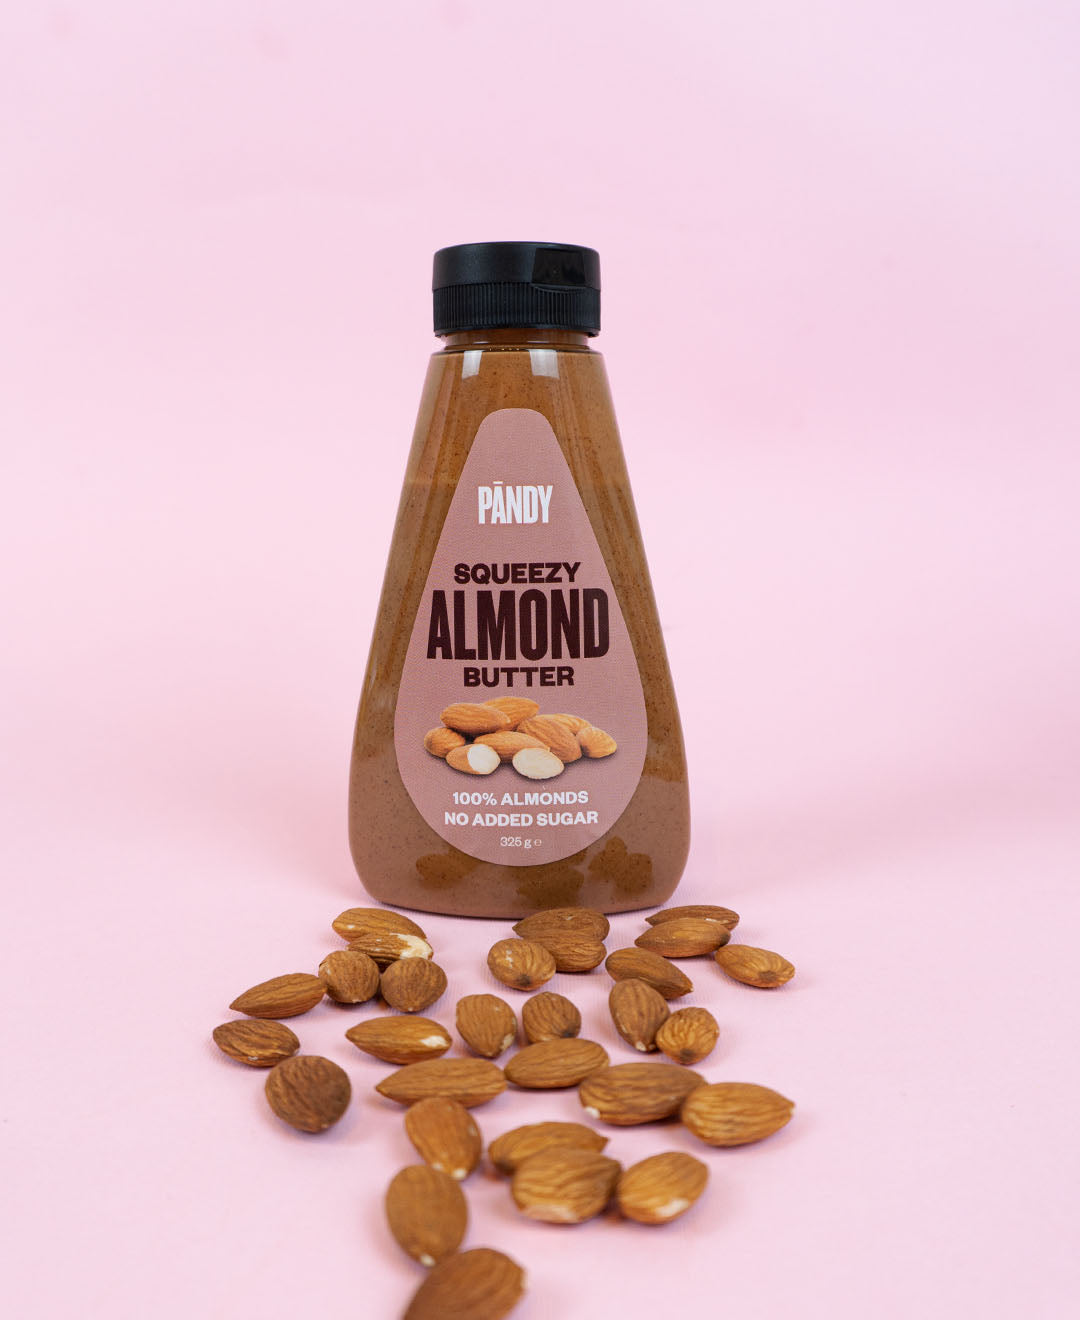 Squeezy Almond Butter